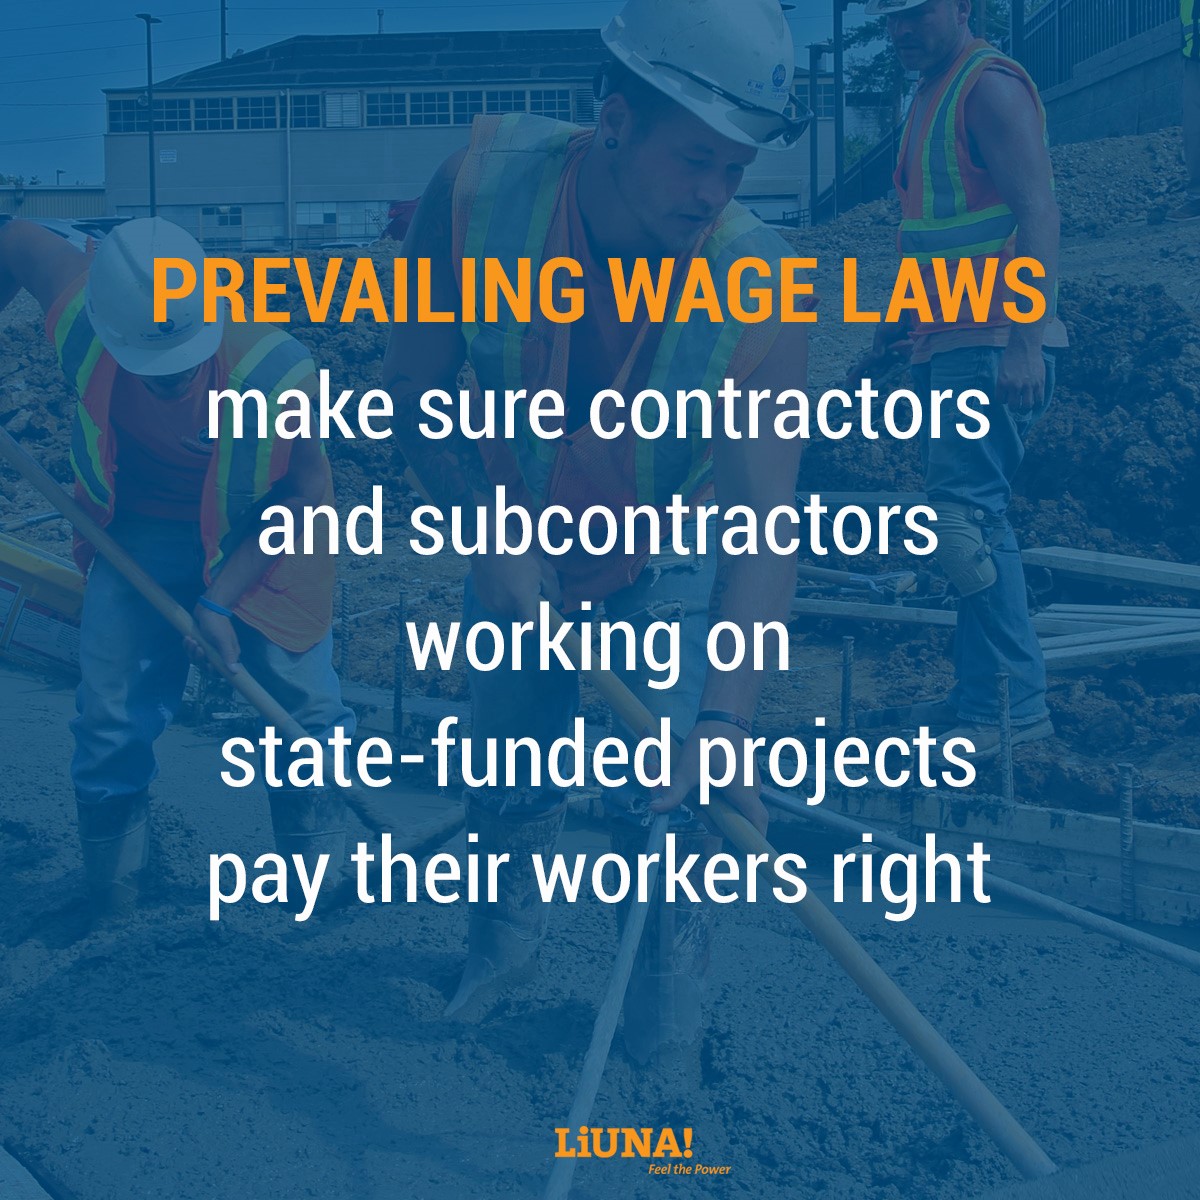 #PrevailingWage laws ensure that all contractors bidding on public construction projects will pay family-supporting wages. In turn, these projects will be built to the highest standards by skilled, safe, well-trained construction craftspeople, like #LiUNA members!

#LiUNABuilds